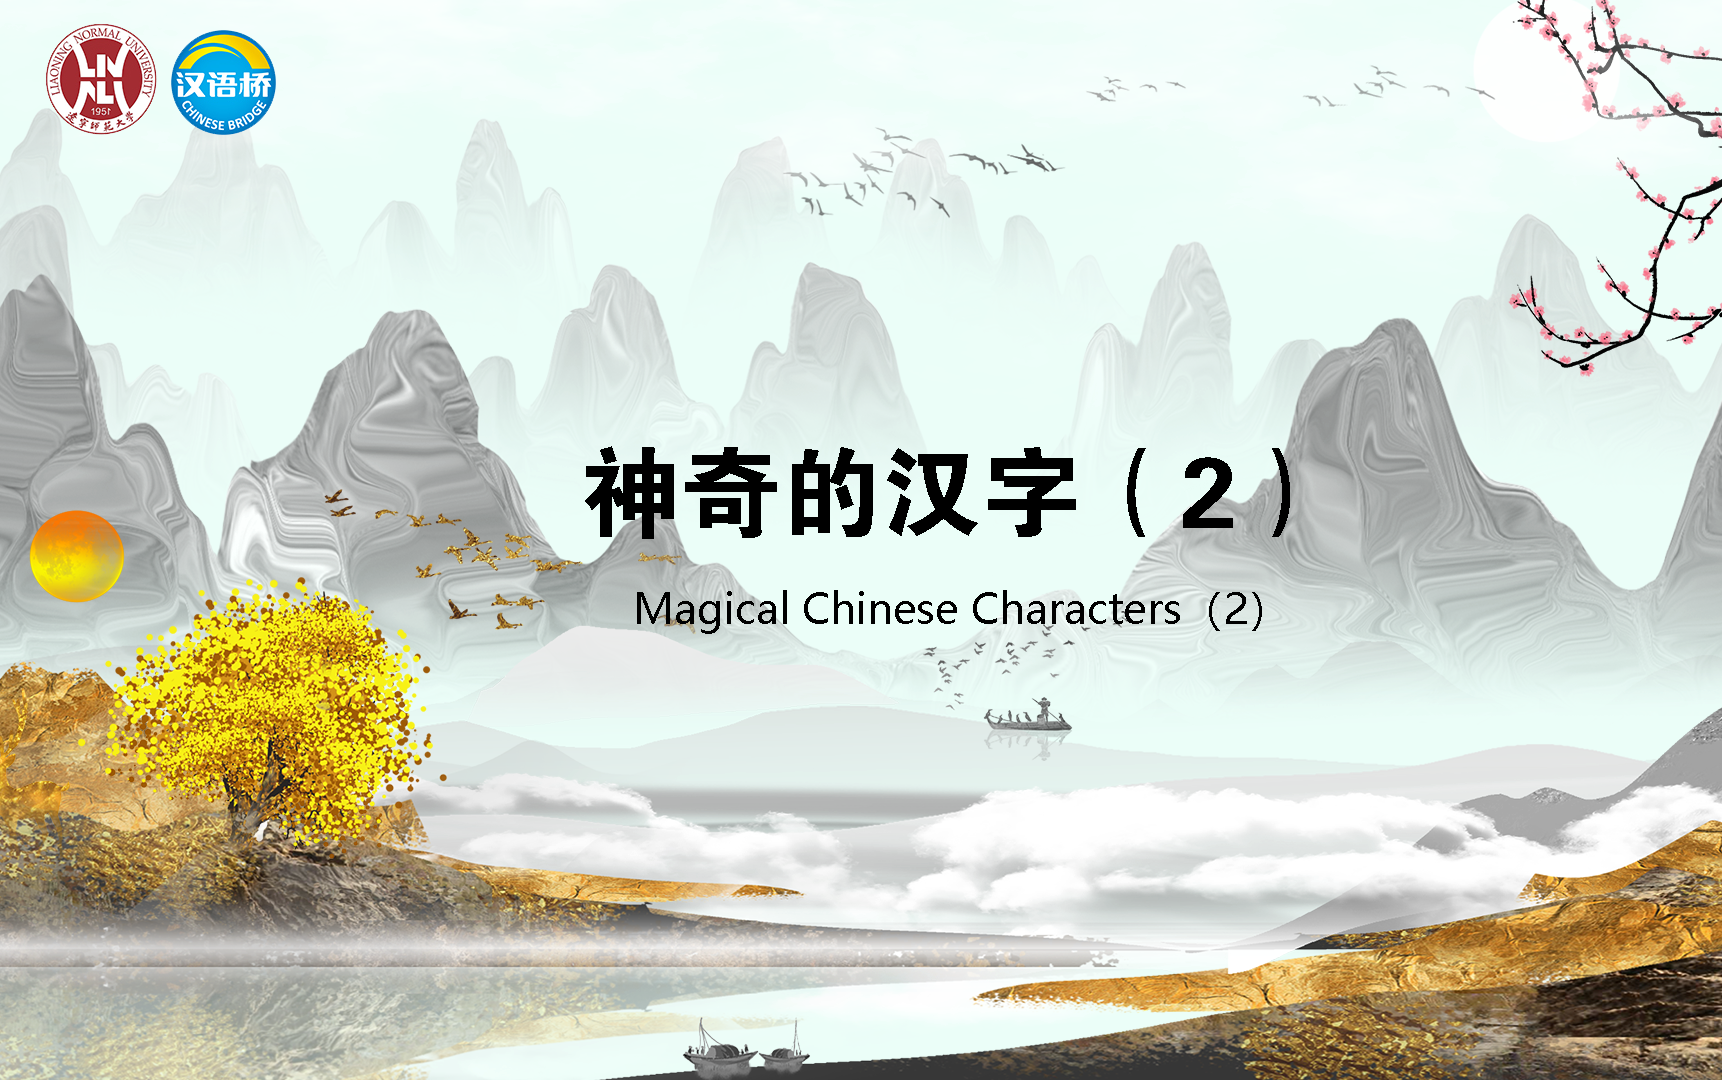 Magical Chinese Characters(2)